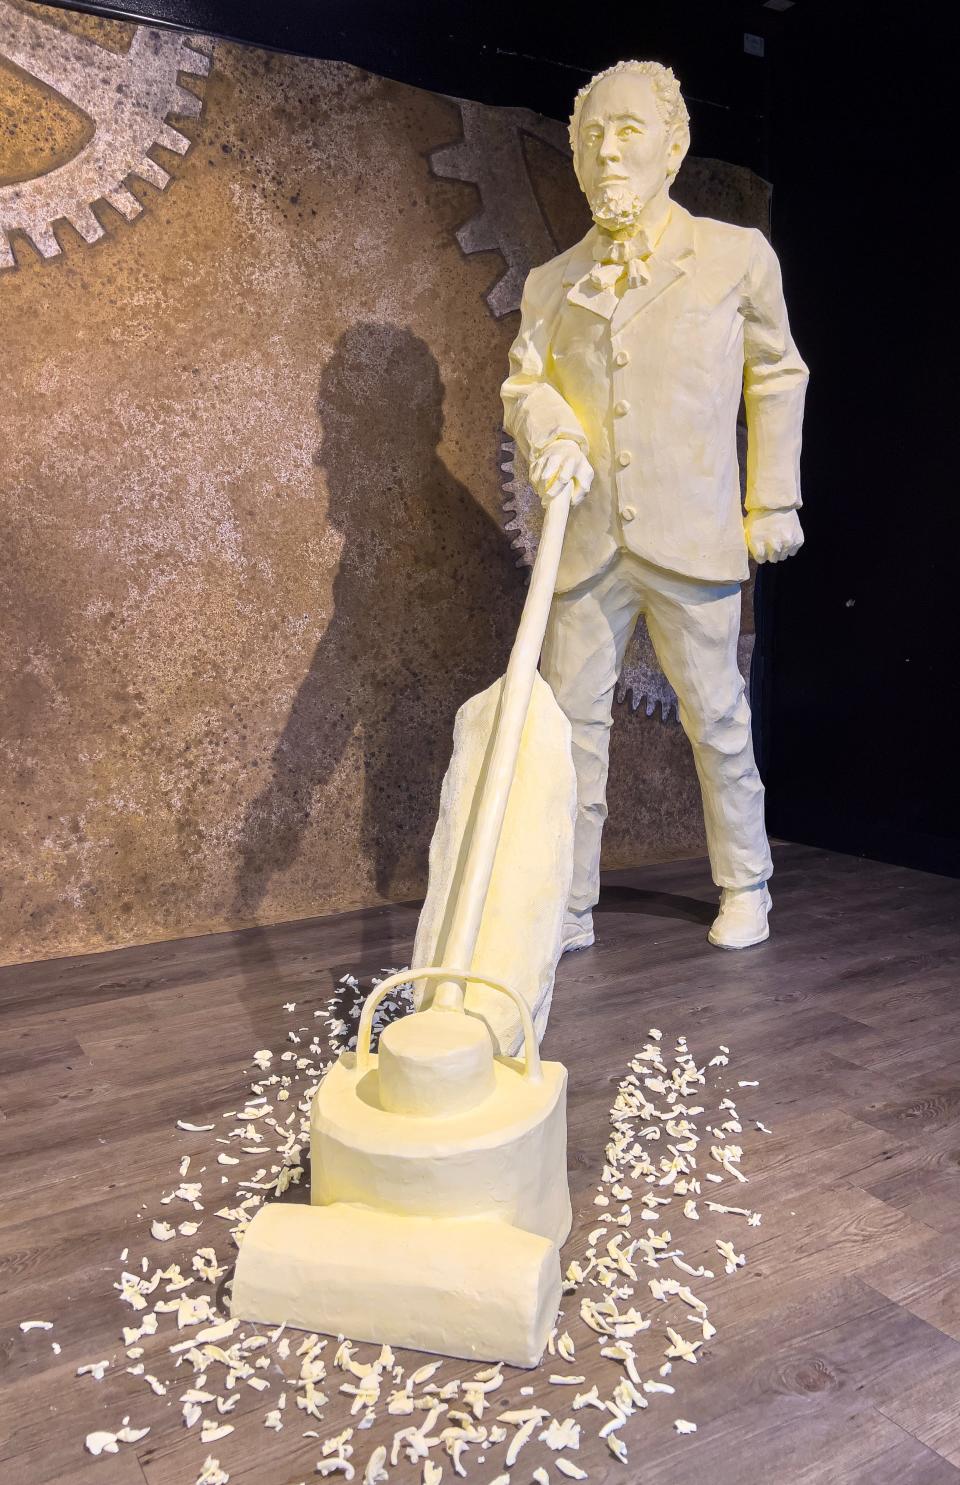 James Spangler and the first electric portable vacuum cleaner are sculpted in butter at this year’s butter cow display at the Ohio State Fair. Spangler invented the vacuum cleaner while working as a janitor in Canton.